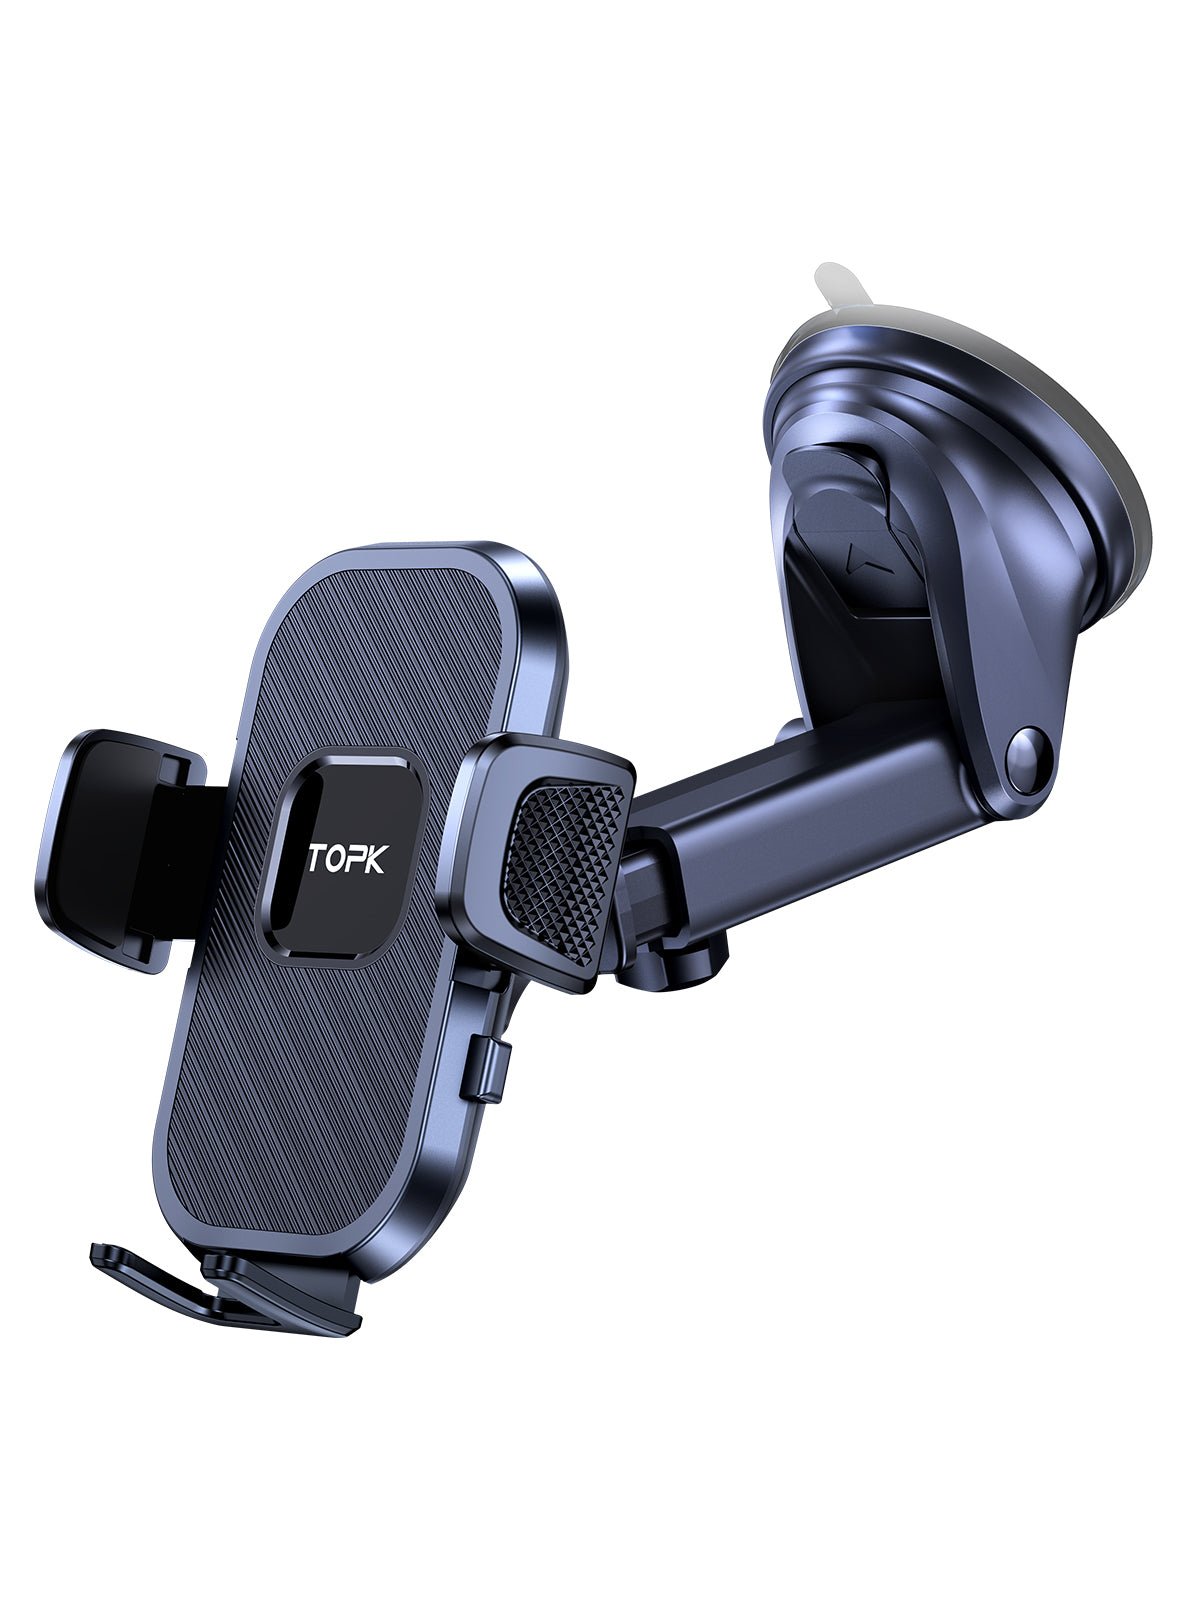 TOPK D38-X Phone Holder for Car Dashboard and Windshield